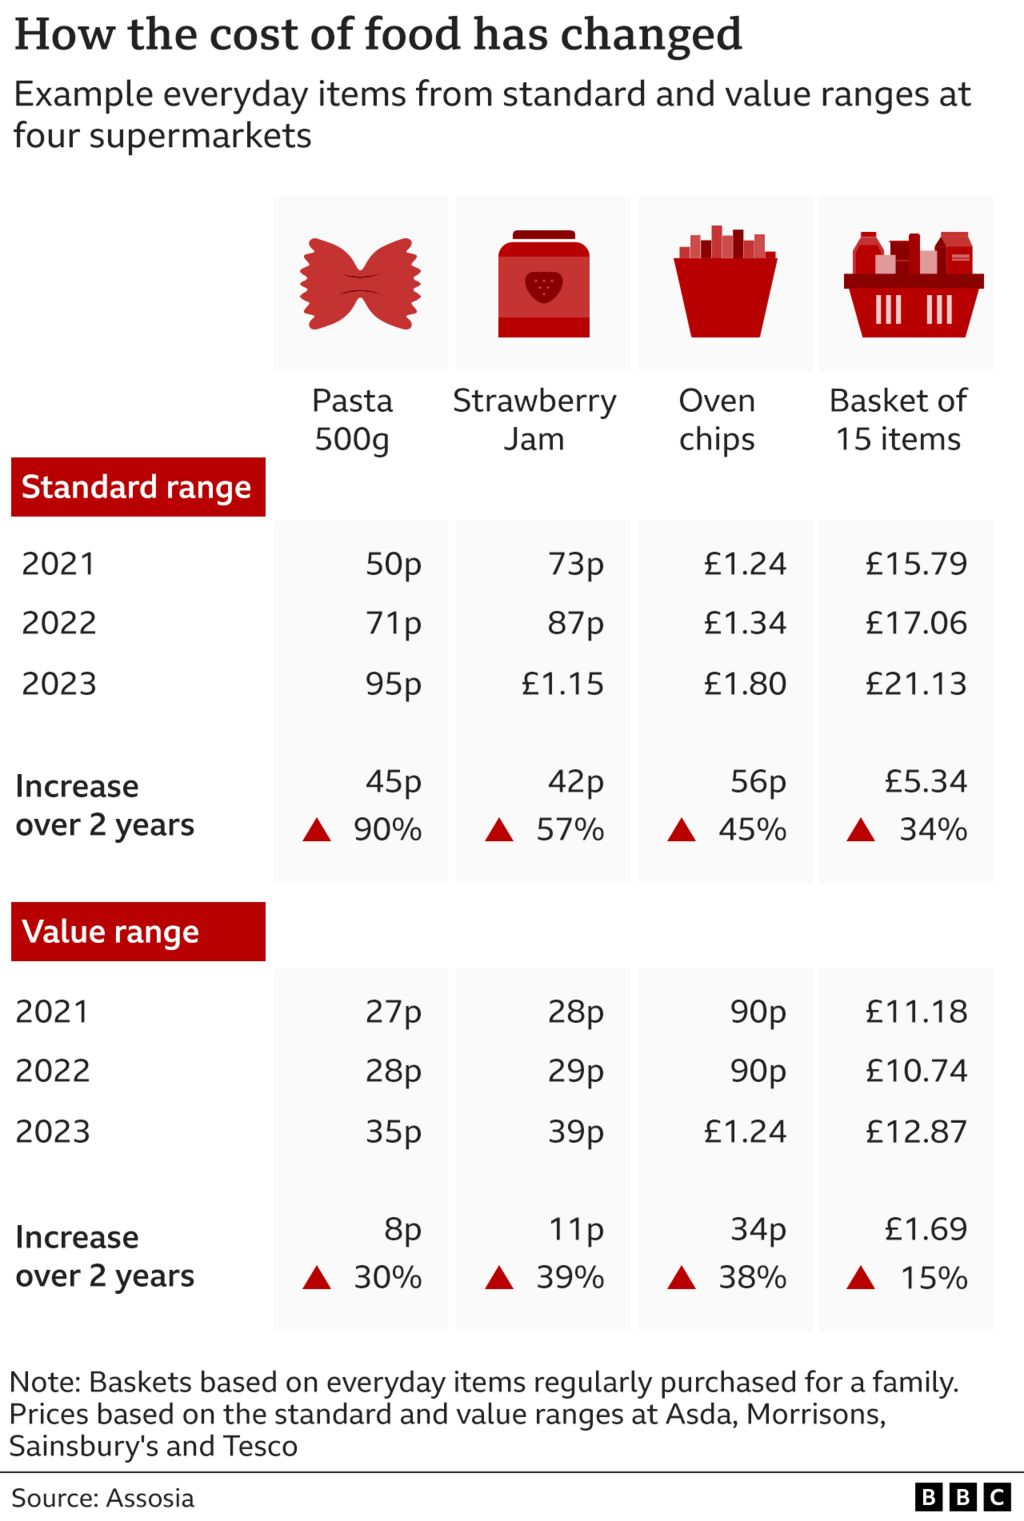 Graphic showing how the cost of food has changed